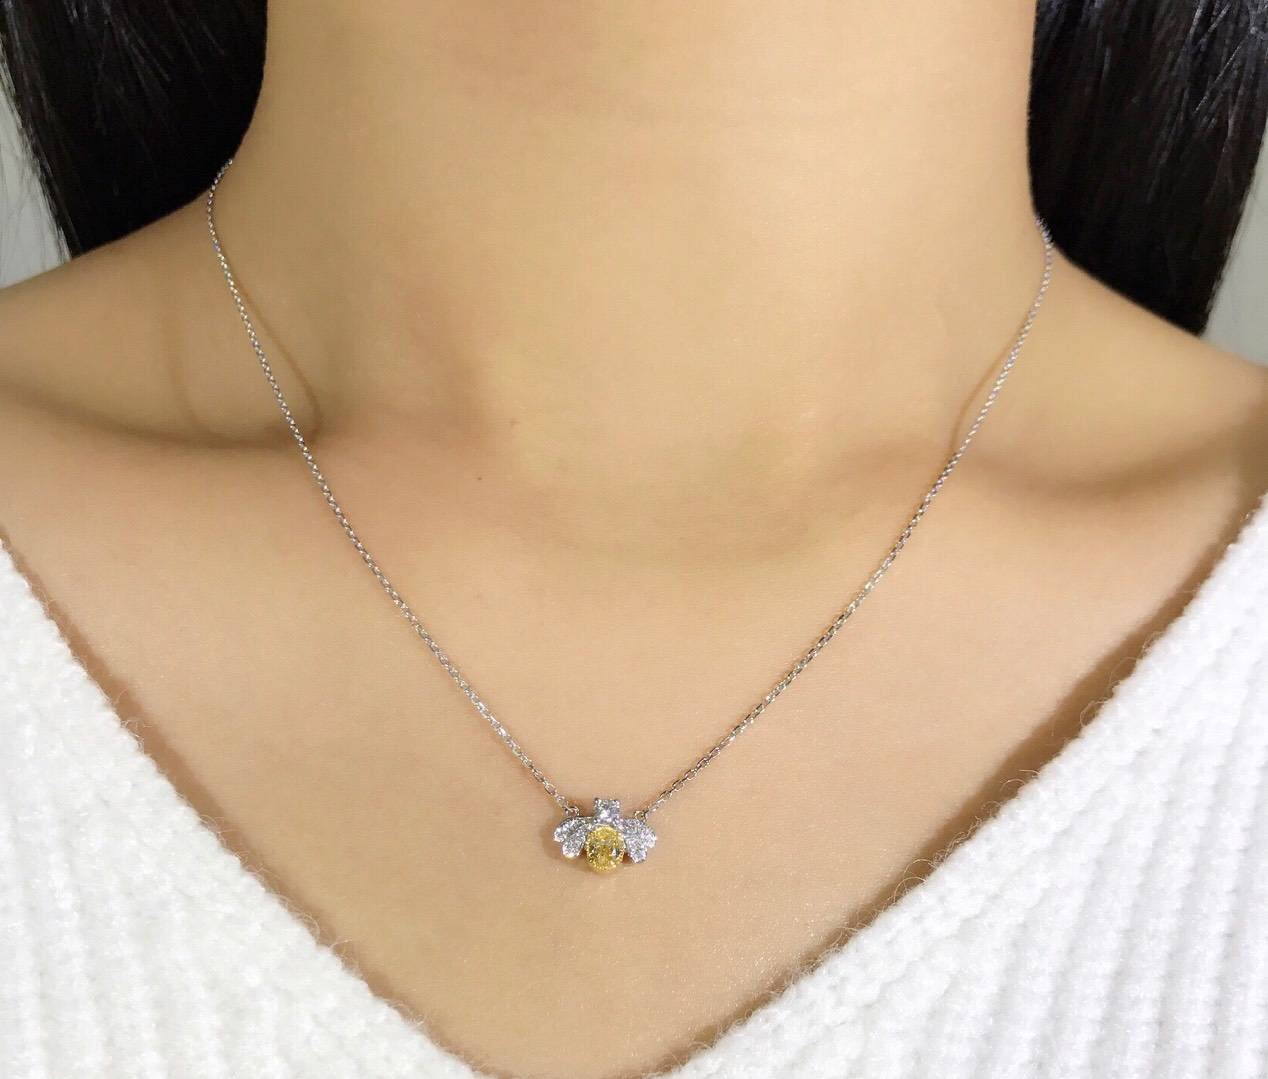 P00828 Bee Shaped Diamond Necklace in 18k White Gold